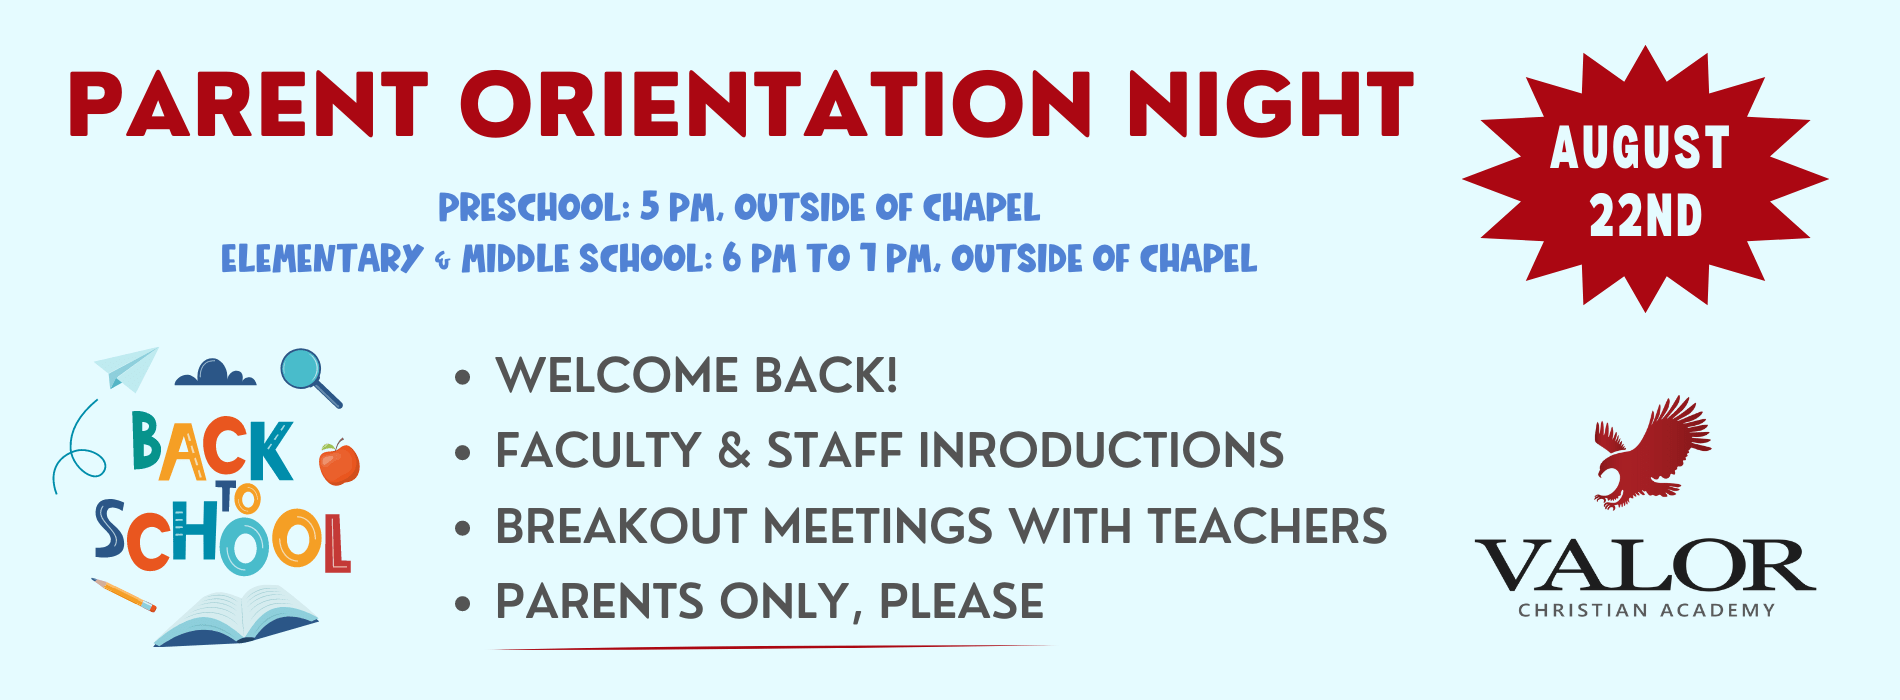 Back to School Parent Orientation Night is August 22nd